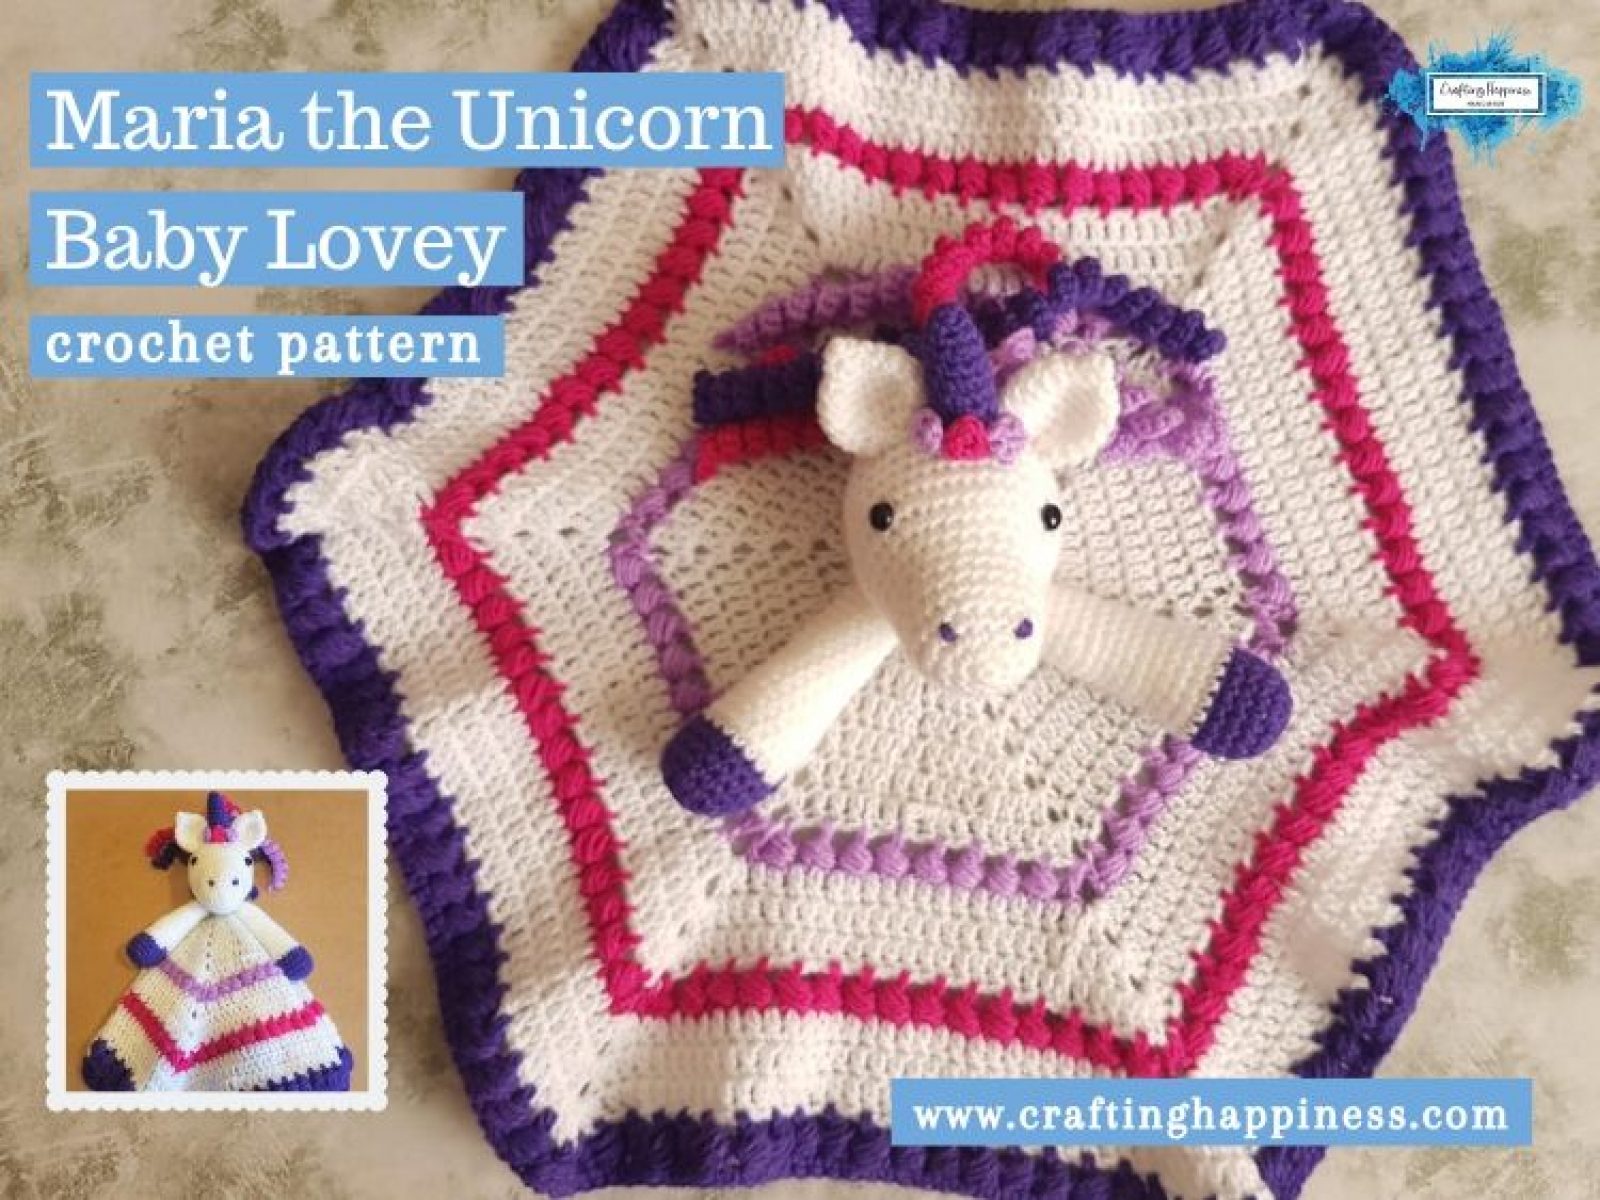 Maria the Unicorn Baby Lovey by Crafting Happiness FACEBOOK POSTER